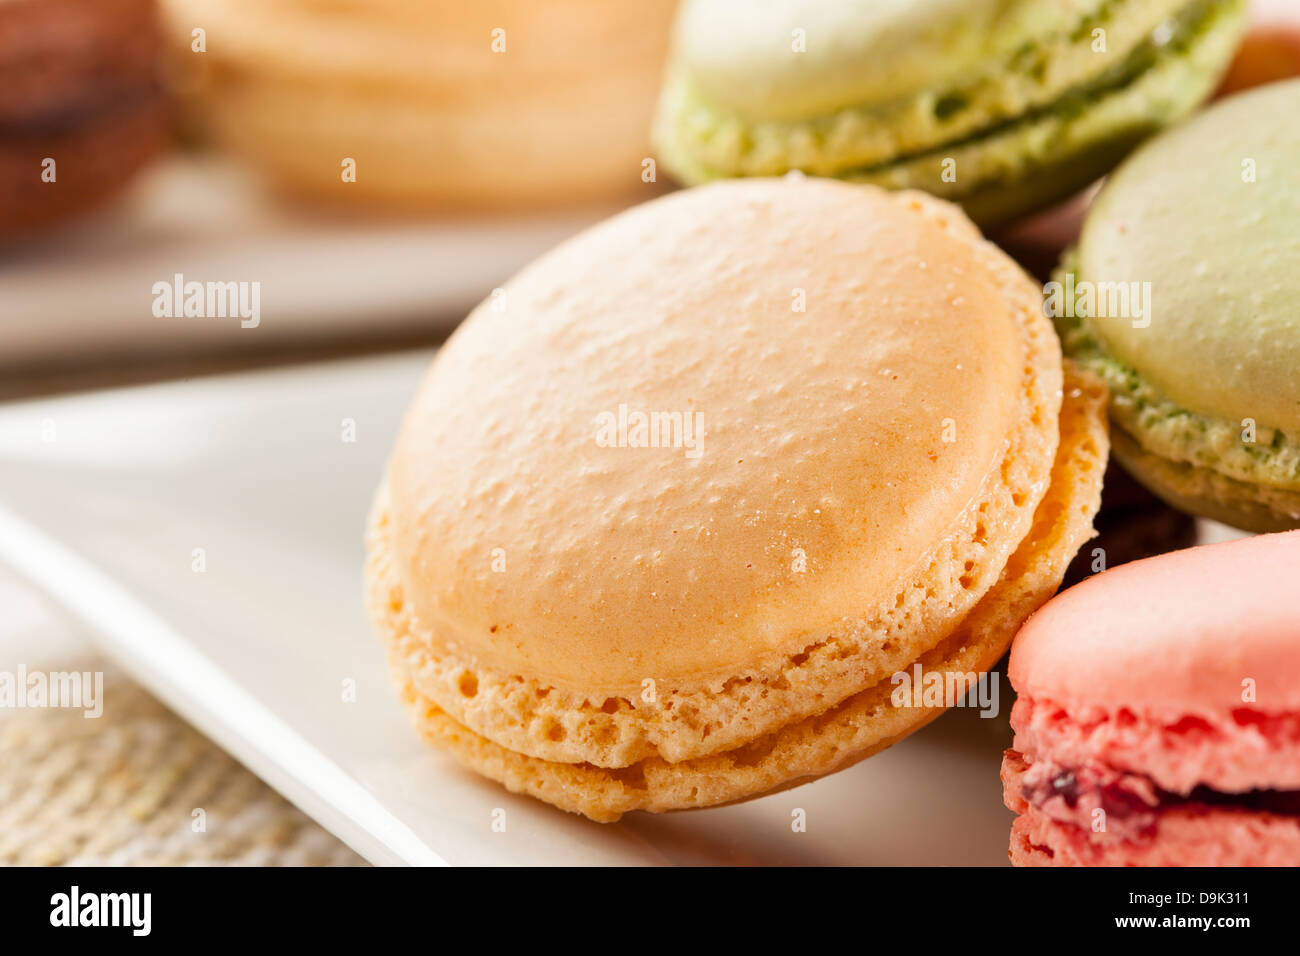 Gourmet Colored Macaroon Cookies with a cream filling Stock Photo